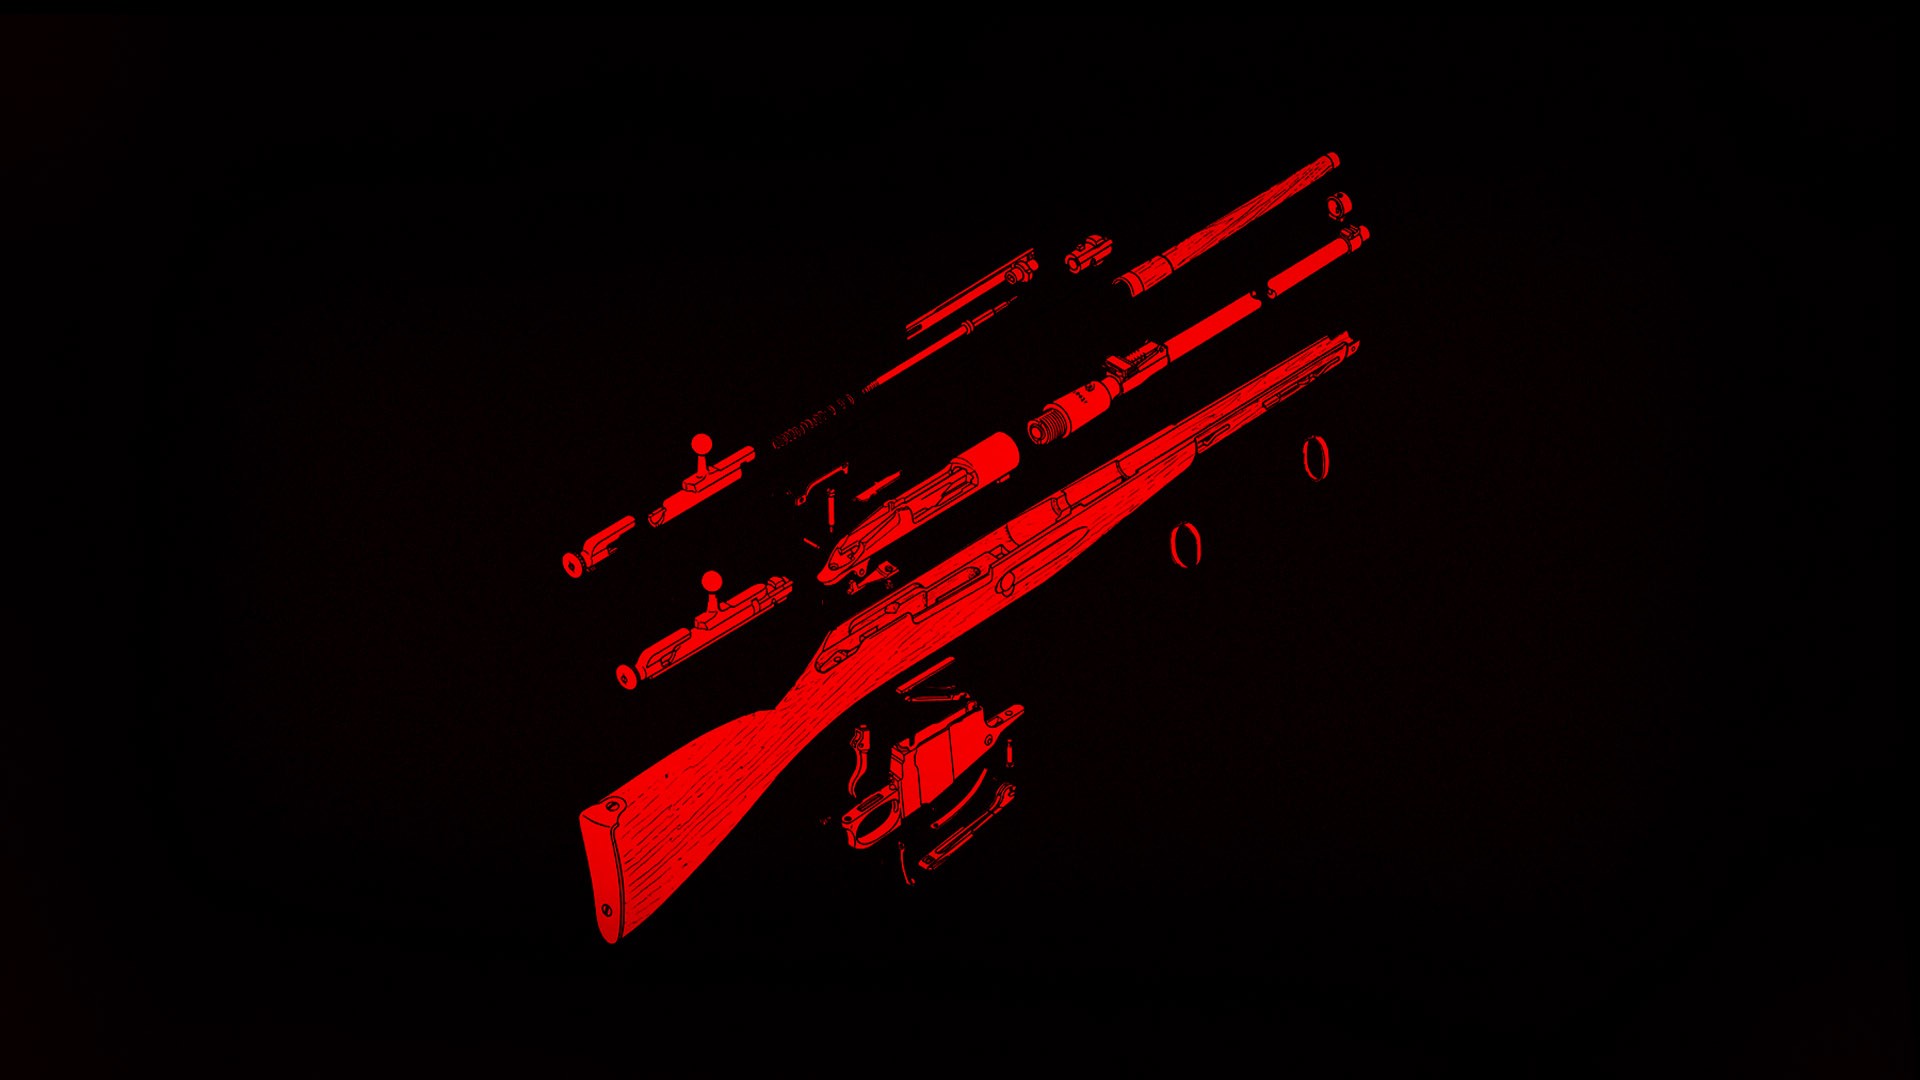 General 1920x1080 Mosin-Nagant Bolt action rifle weapon minimalism black background red rifles Russian/Soviet firearms